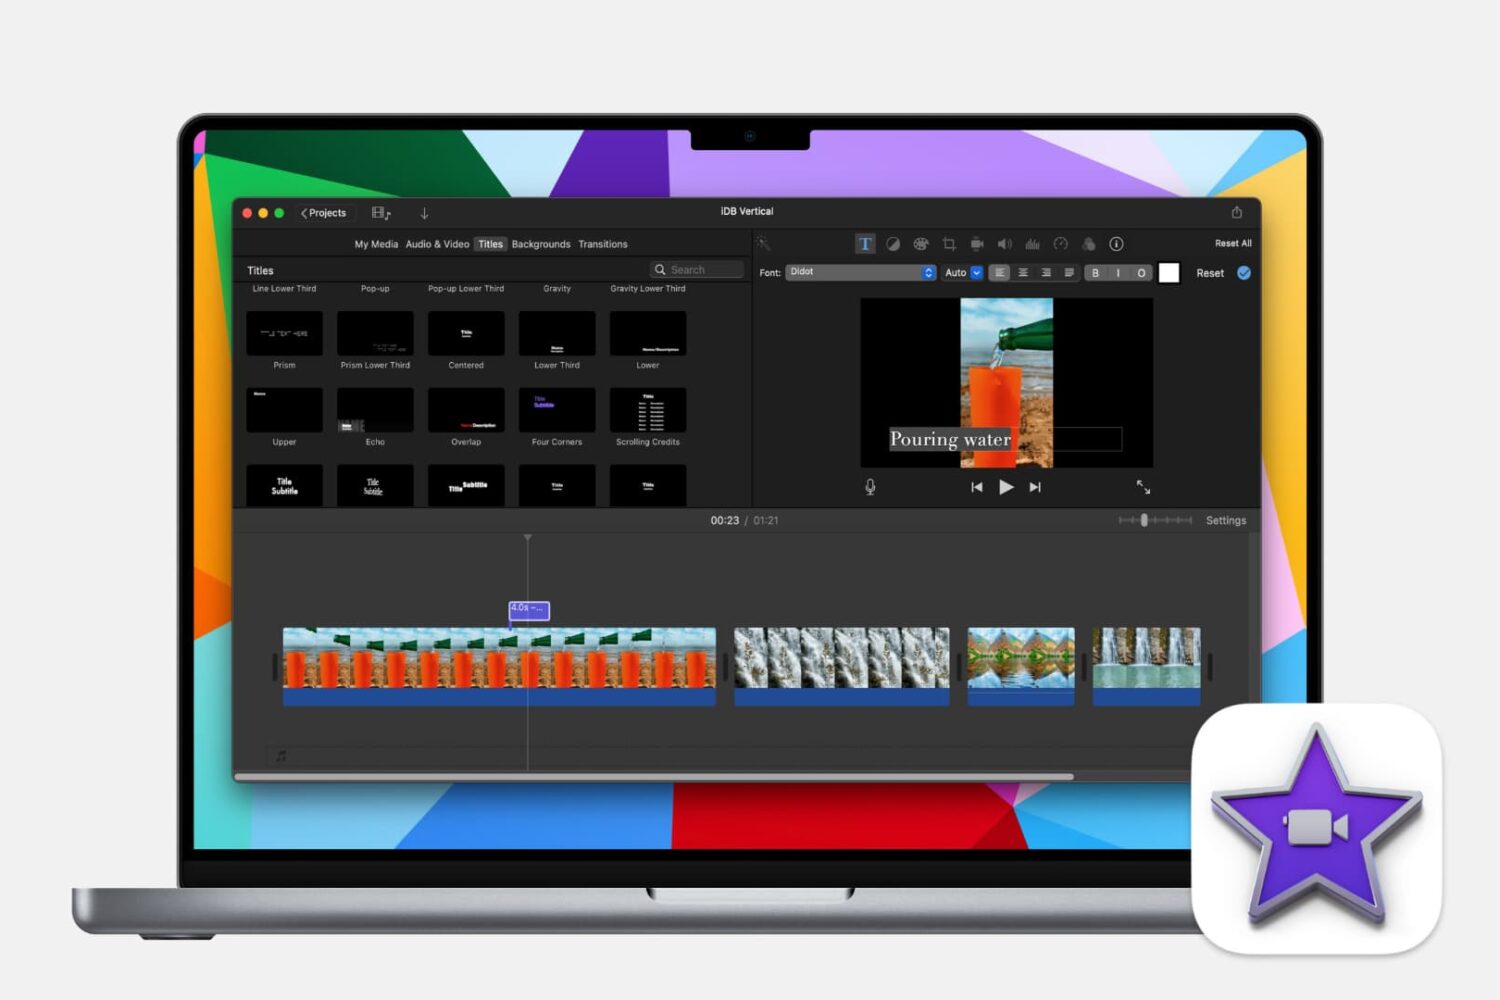 Titles in iMovie on Mac